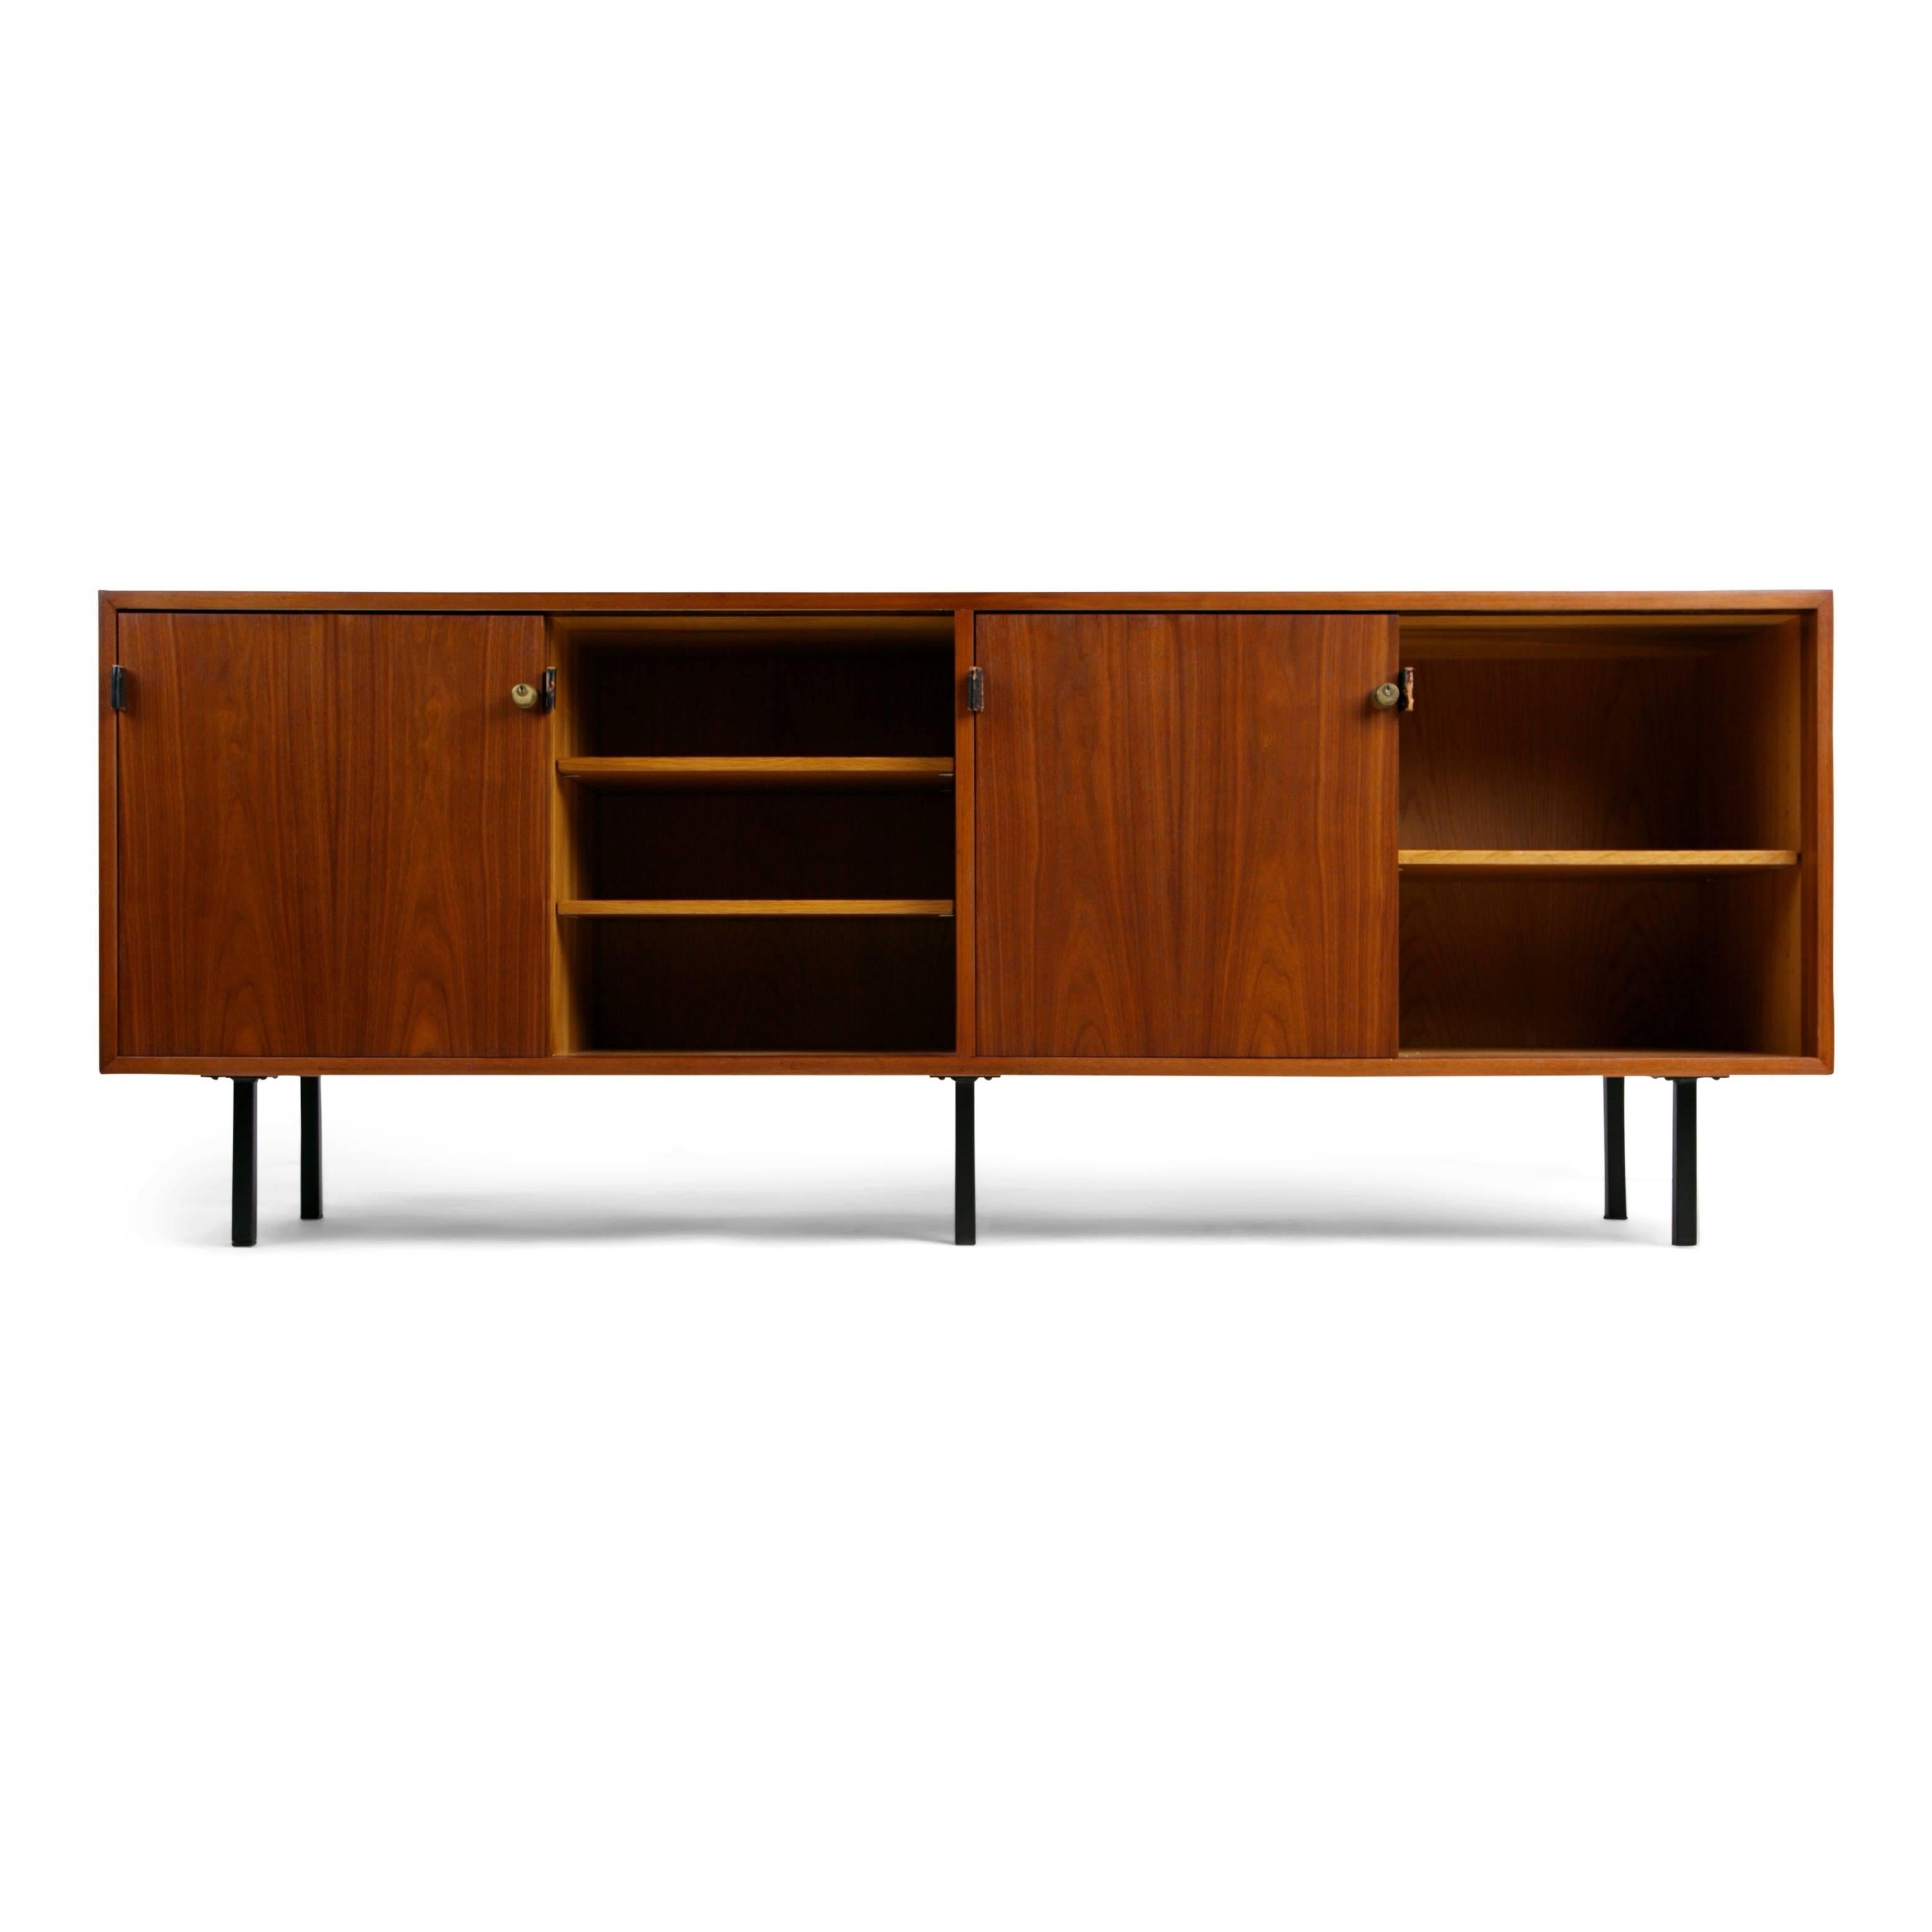 Sleekly designed credenza by Florence Knoll for Knoll Associates. This newly restored sideboard is fabricated from walnut and features the original leather pulls, hardware, and locks which have been fitted with new keys. The interior comprises of